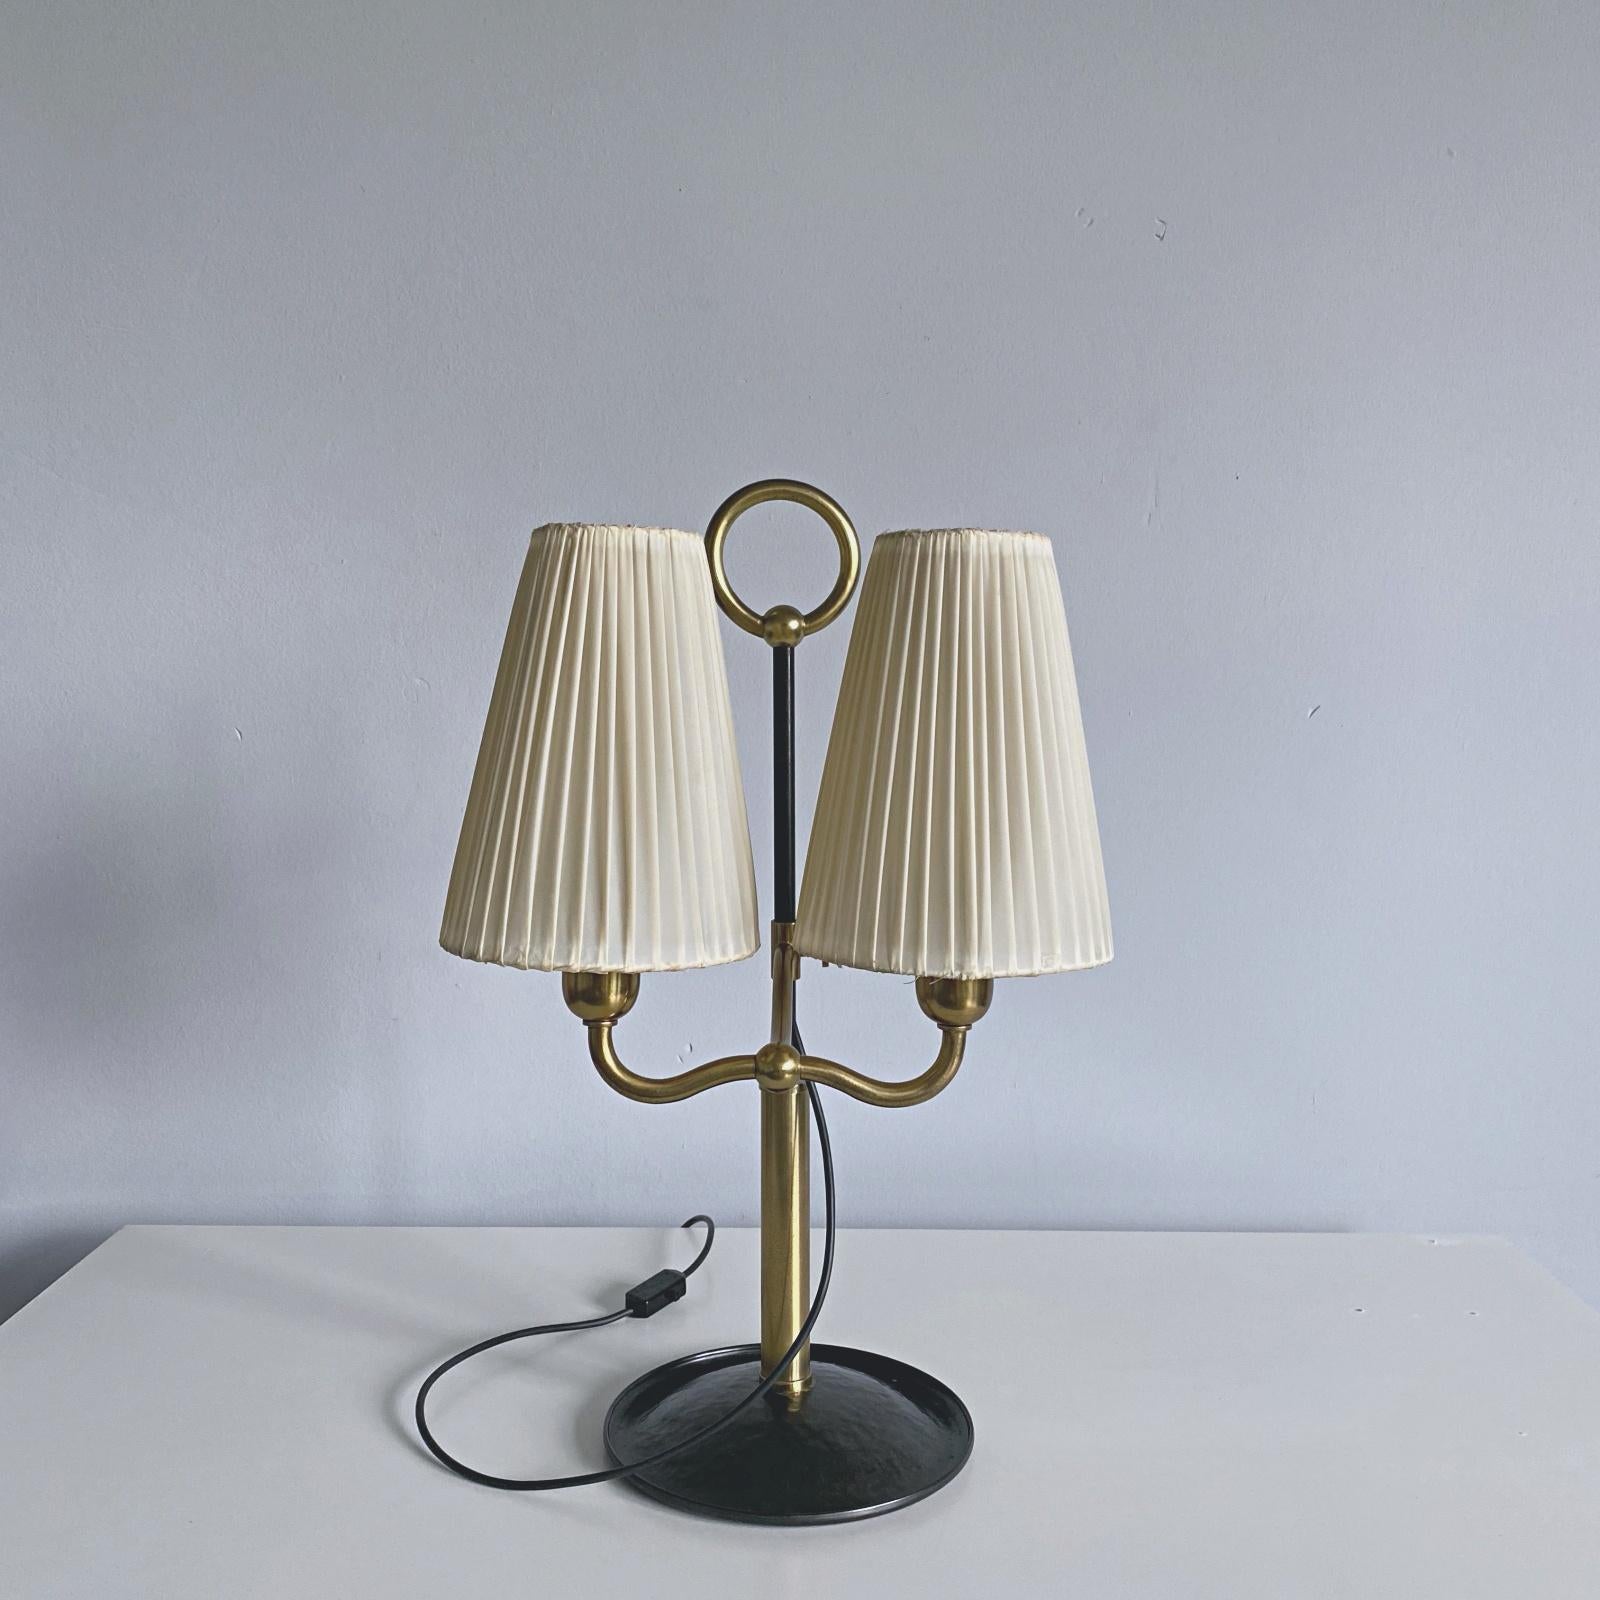 Very rare and elegant Viennese Modern Age adjustable brass and forged iron table lamp designed by Josef Frank for Haus & Garten in late 1920s, Vienna. Josef Frank was very famous architect and designer. He was one of the founders of Viennese Modern,